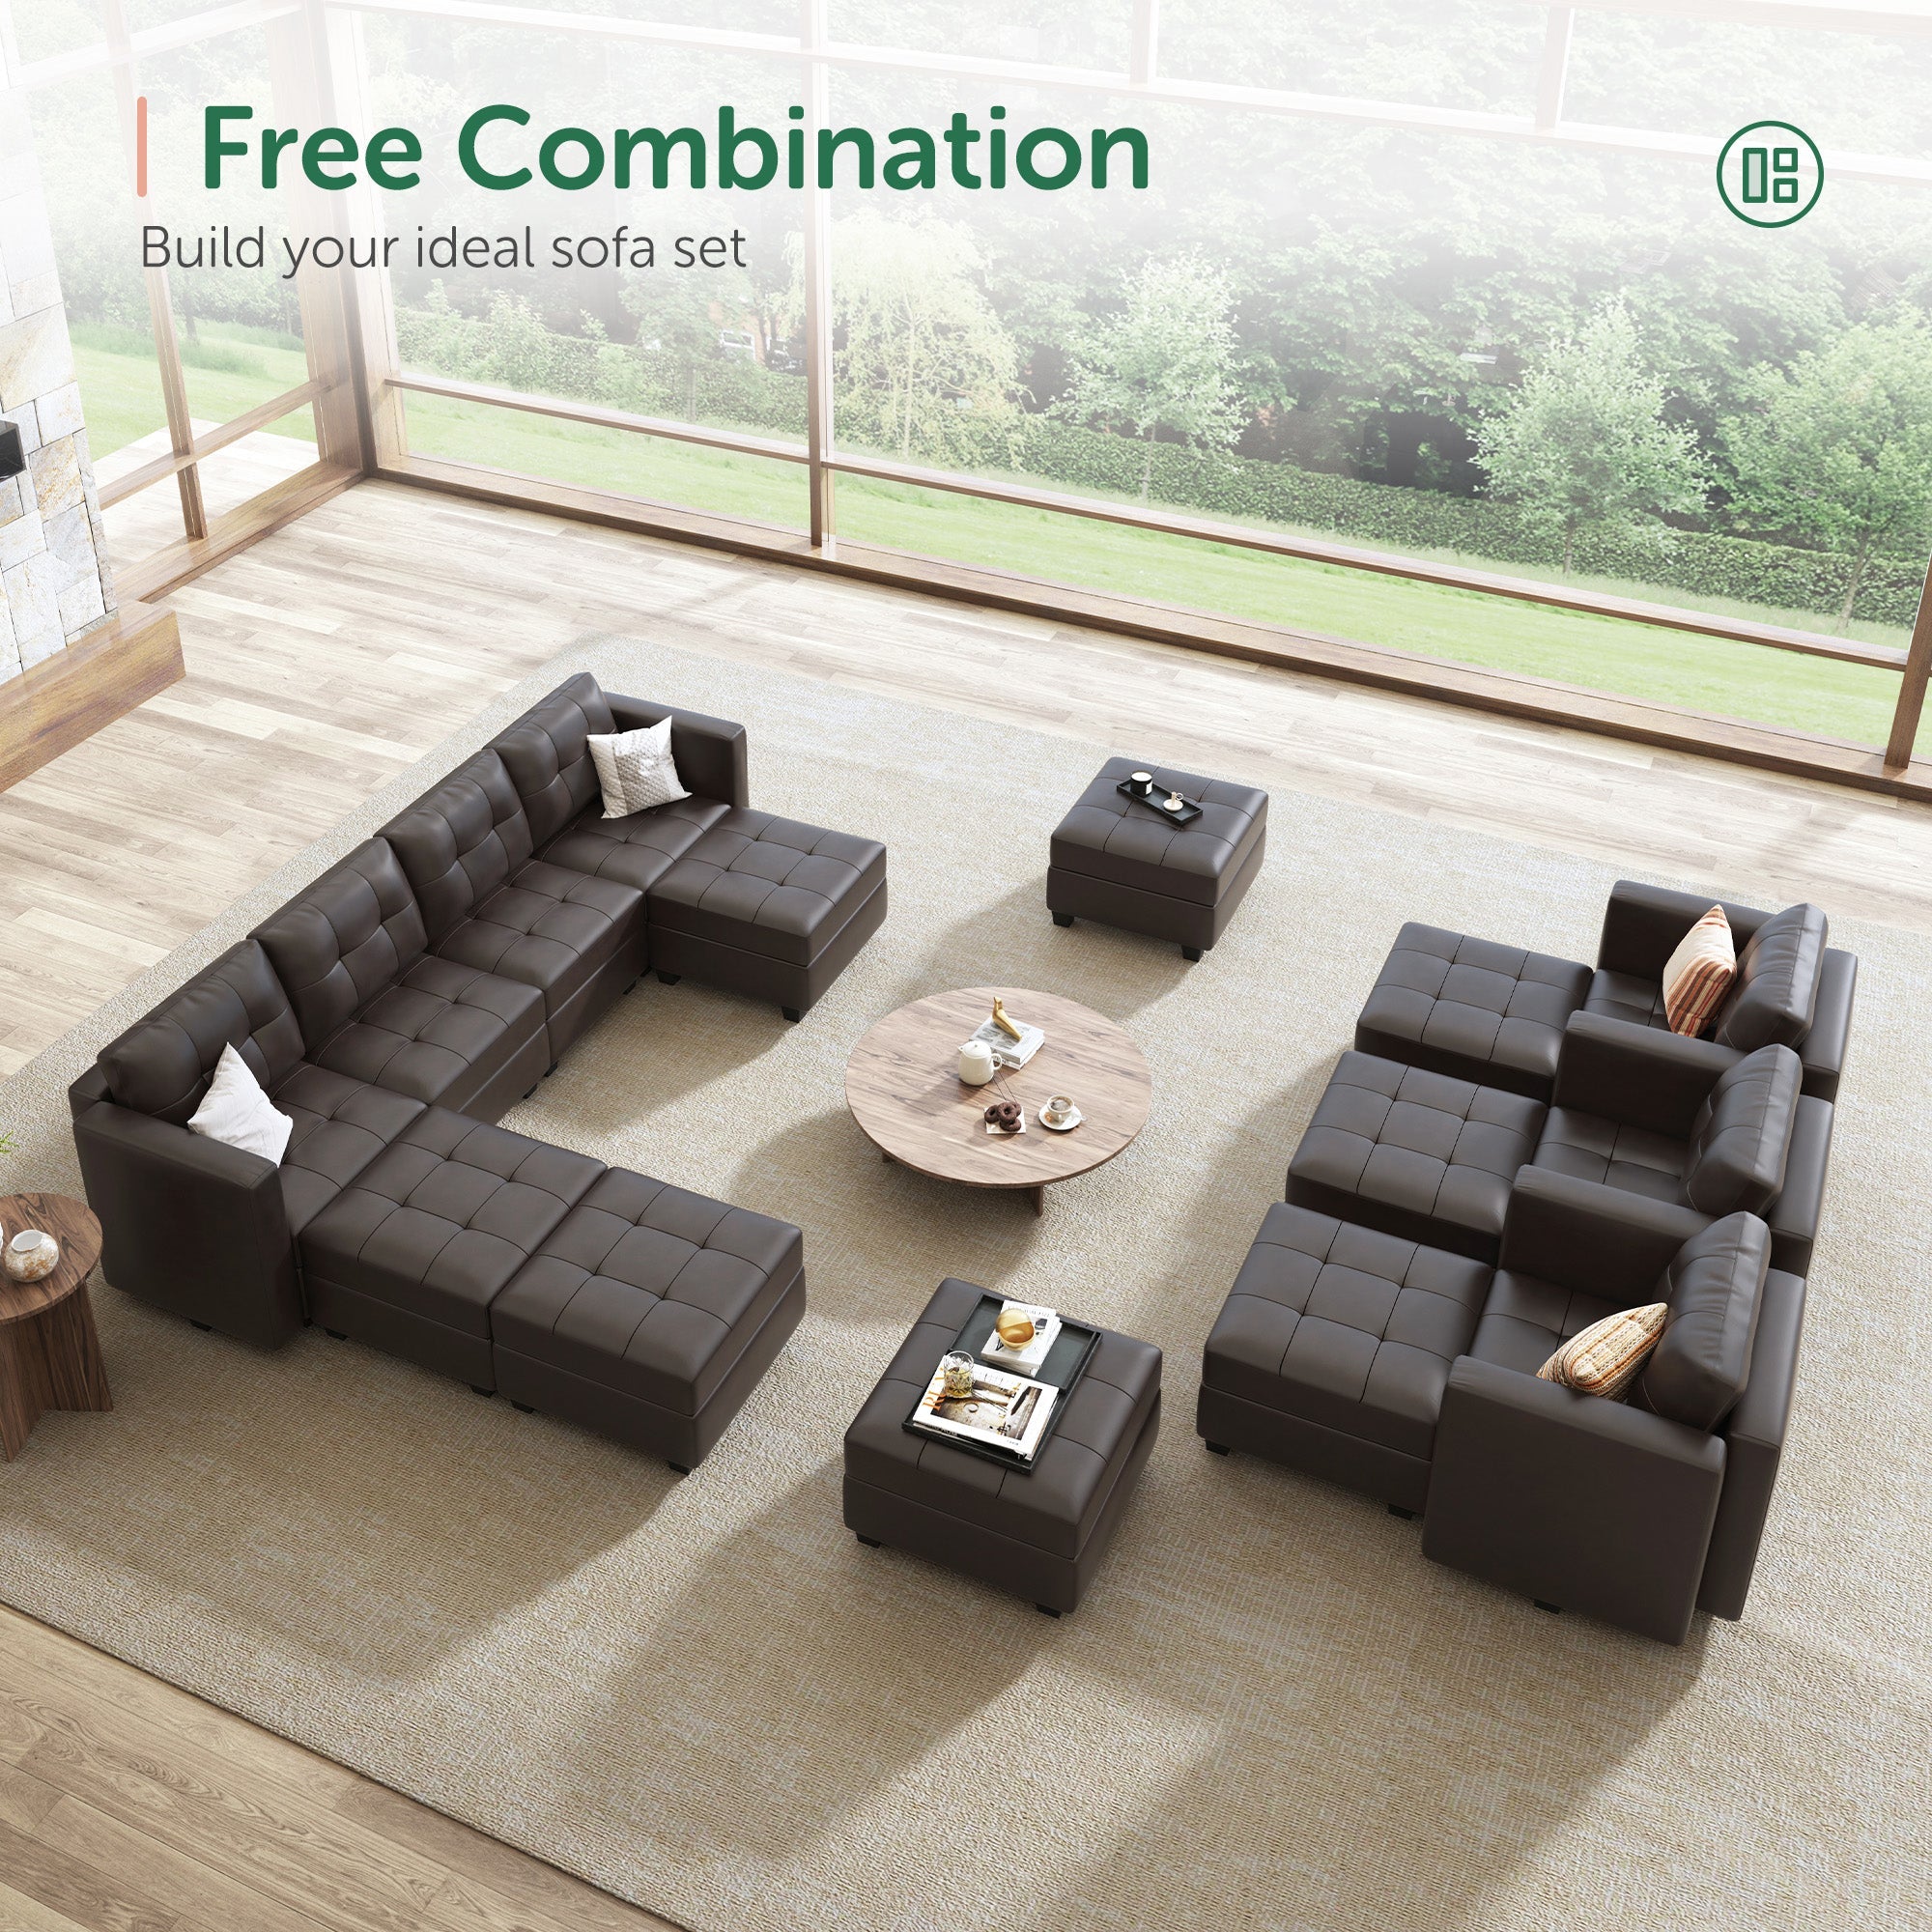 HONBAY 11-Piece Faux Leather Modular Sleeper Sectional With Storage Seat